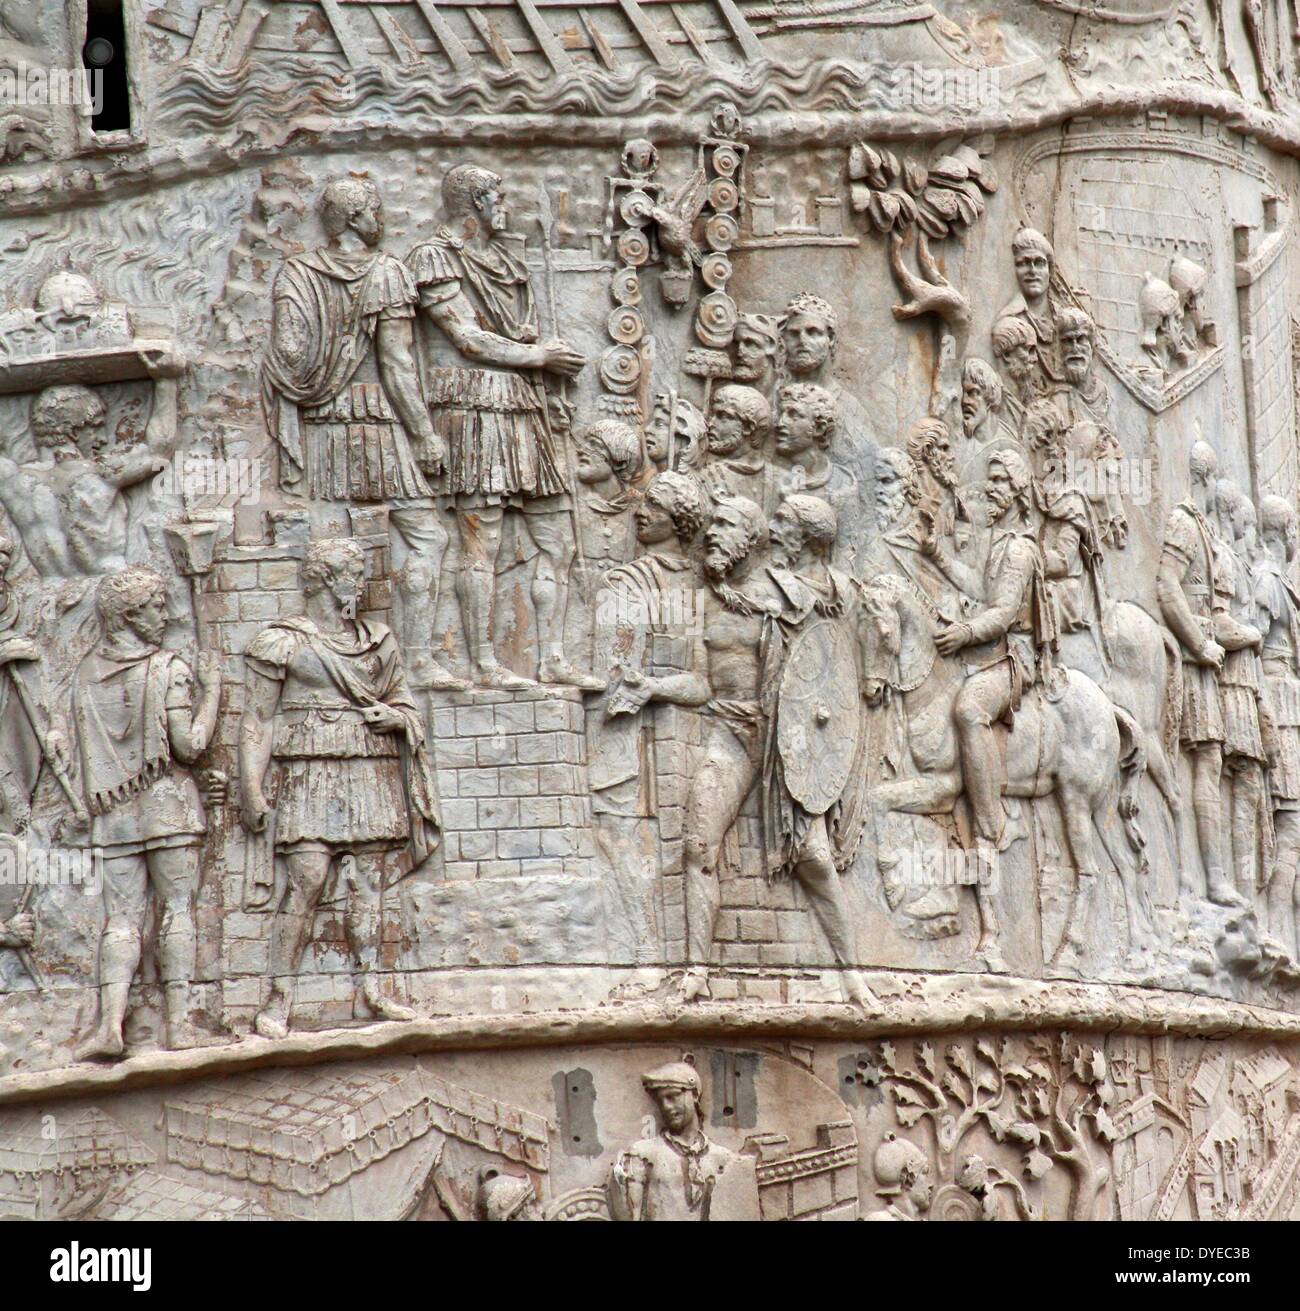 Trajan's Column is a Roman column commemorating the Roman Emperor Trajan's victory in the Dacian Wars. Located in Trajan's Forum, north of the Roman Forum. The spiral Bas Relief artistically describes the epic battles between the Romans and Dacians. Completed in 113 AD. Rome. Italy 2013 Stock Photo